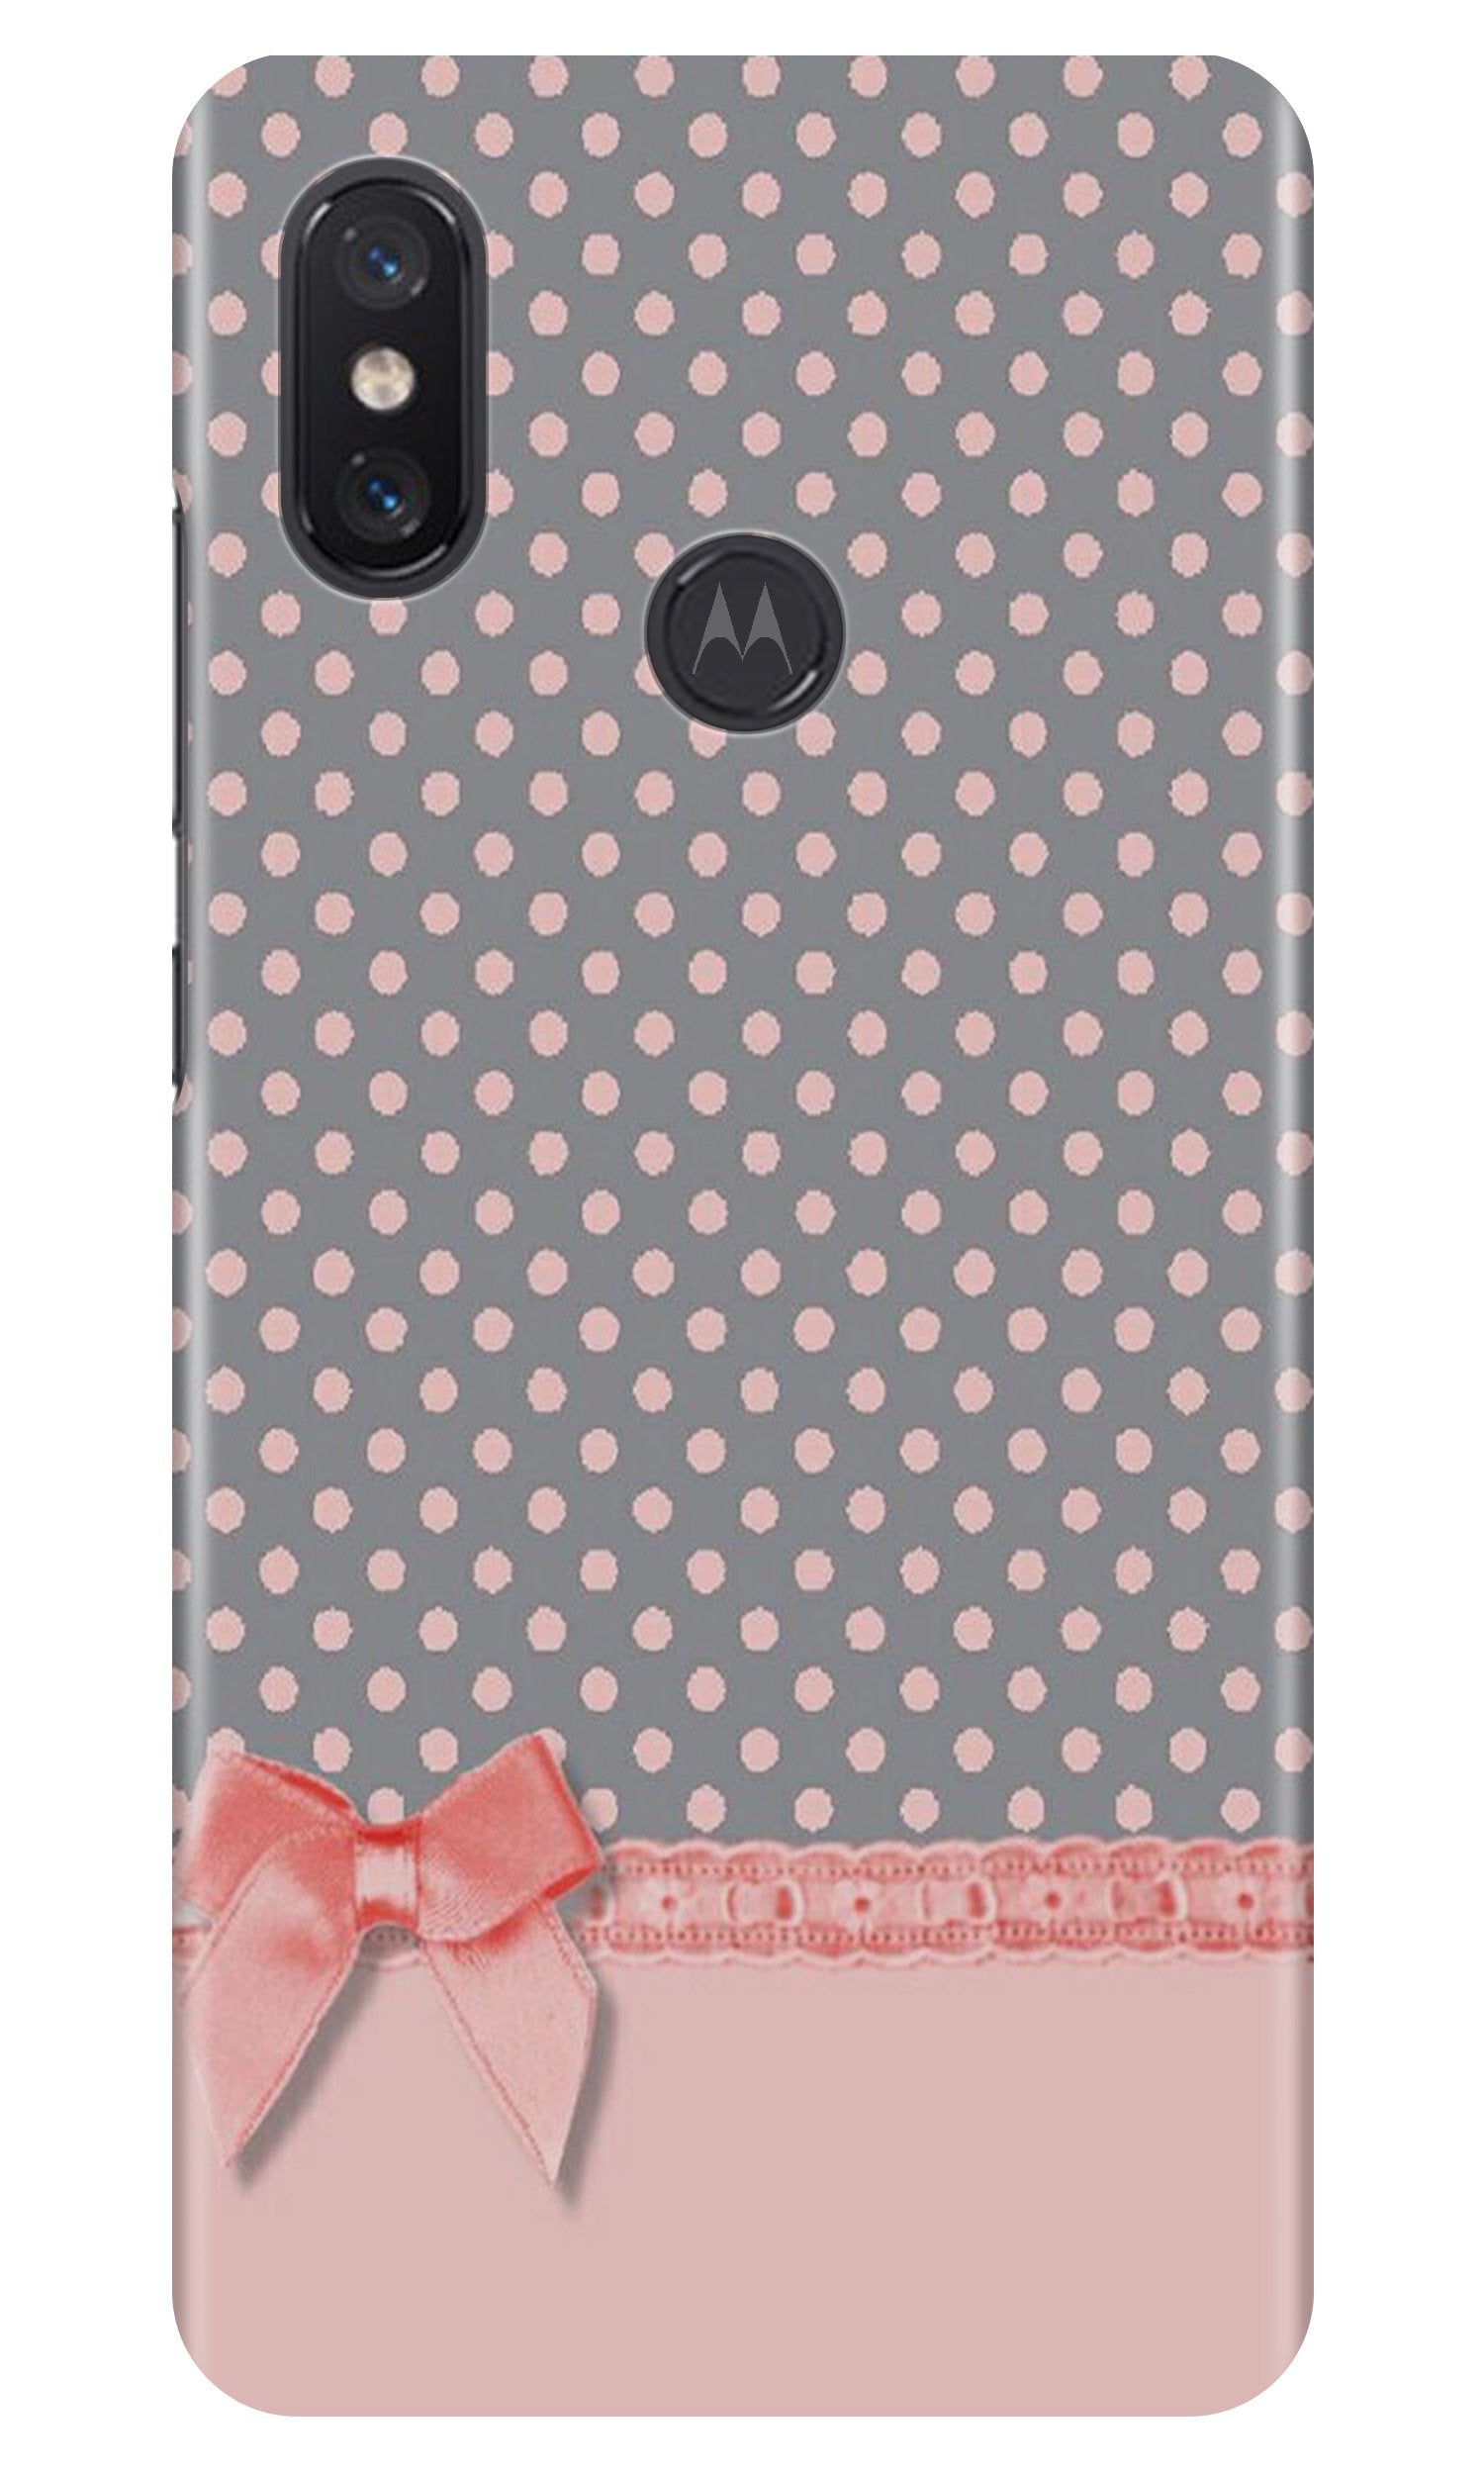 Gift Wrap2 Case for Moto One Power